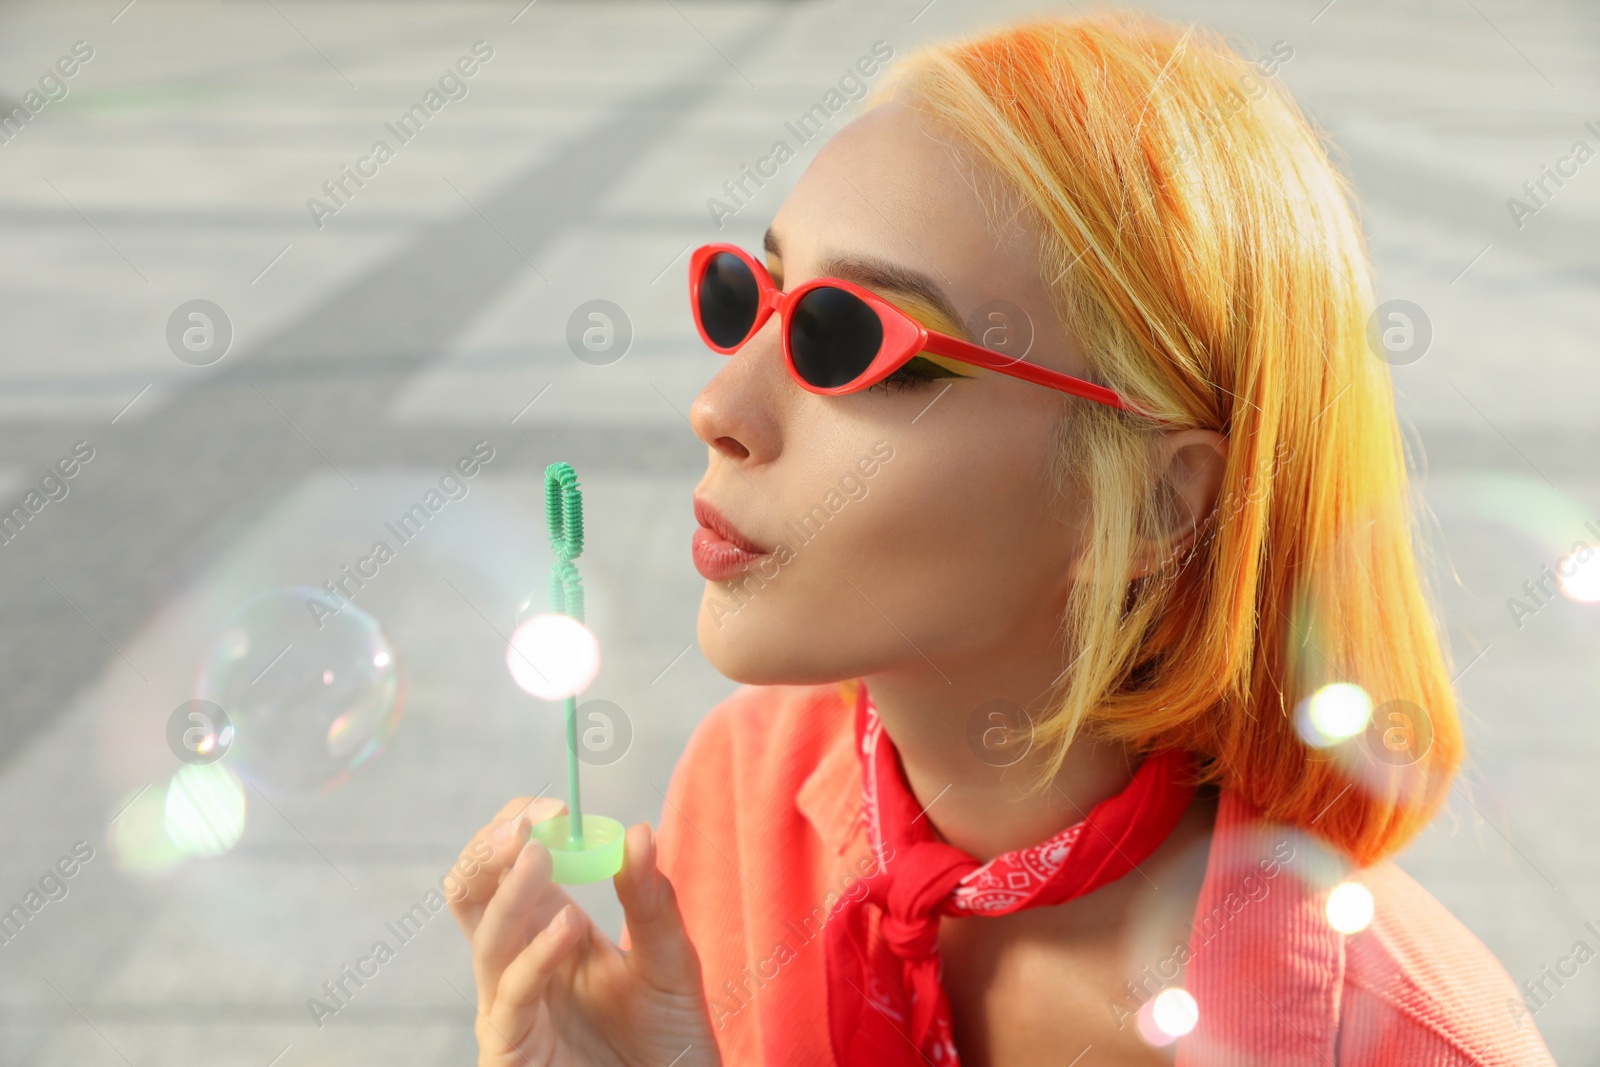 Photo of Beautiful young woman with bright dyed hair blowing soap bubbles outdoors